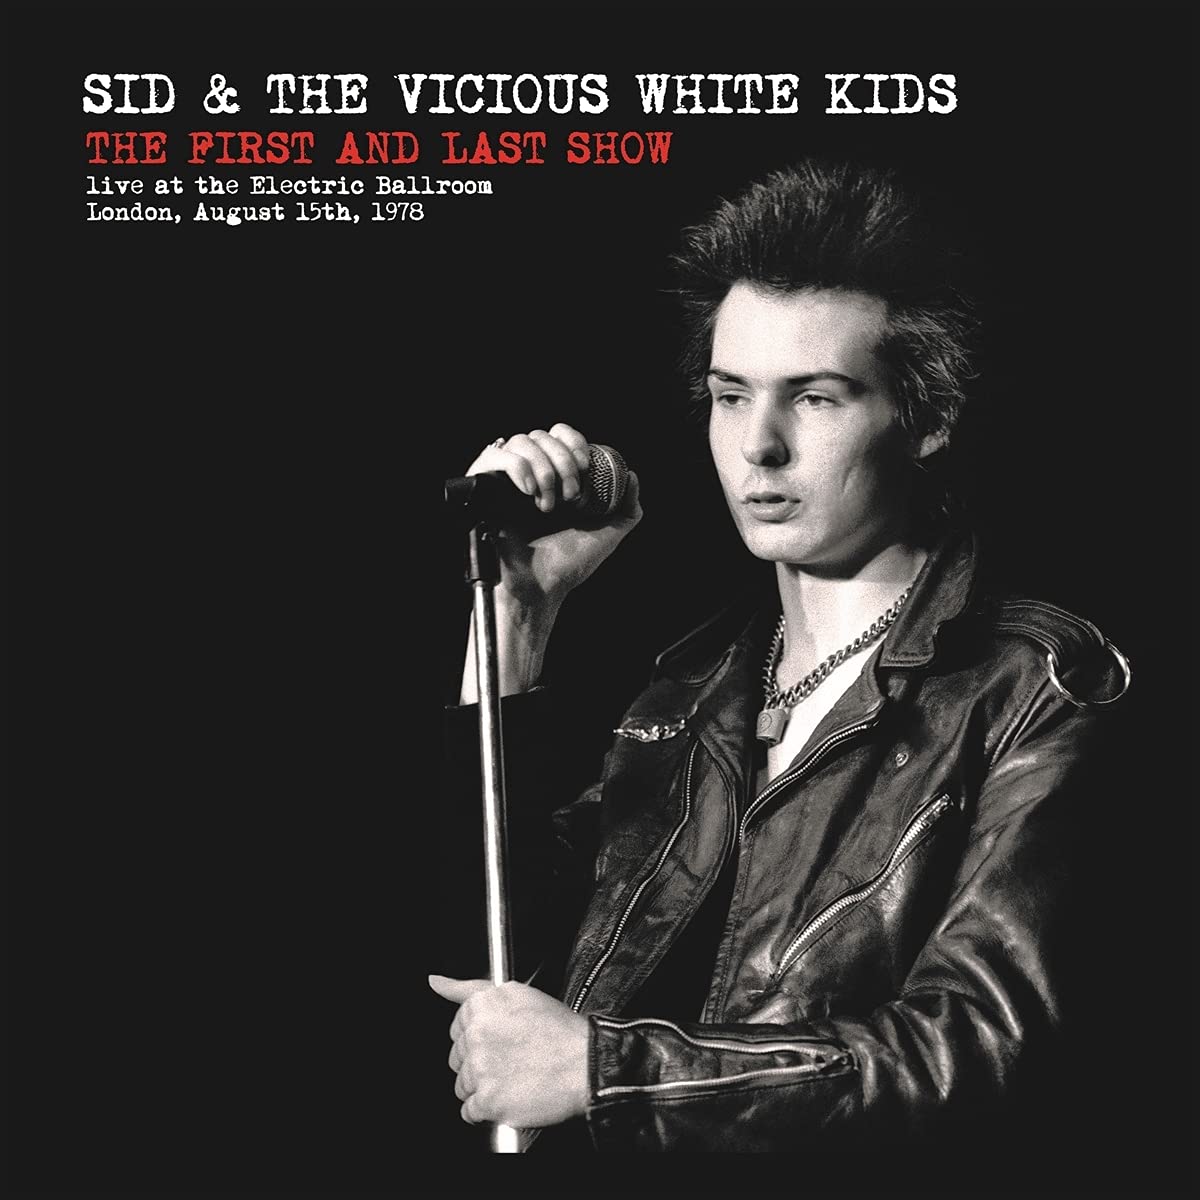 Sid and the Vicious White Kids - The First and Last Show (Vinyl LP)